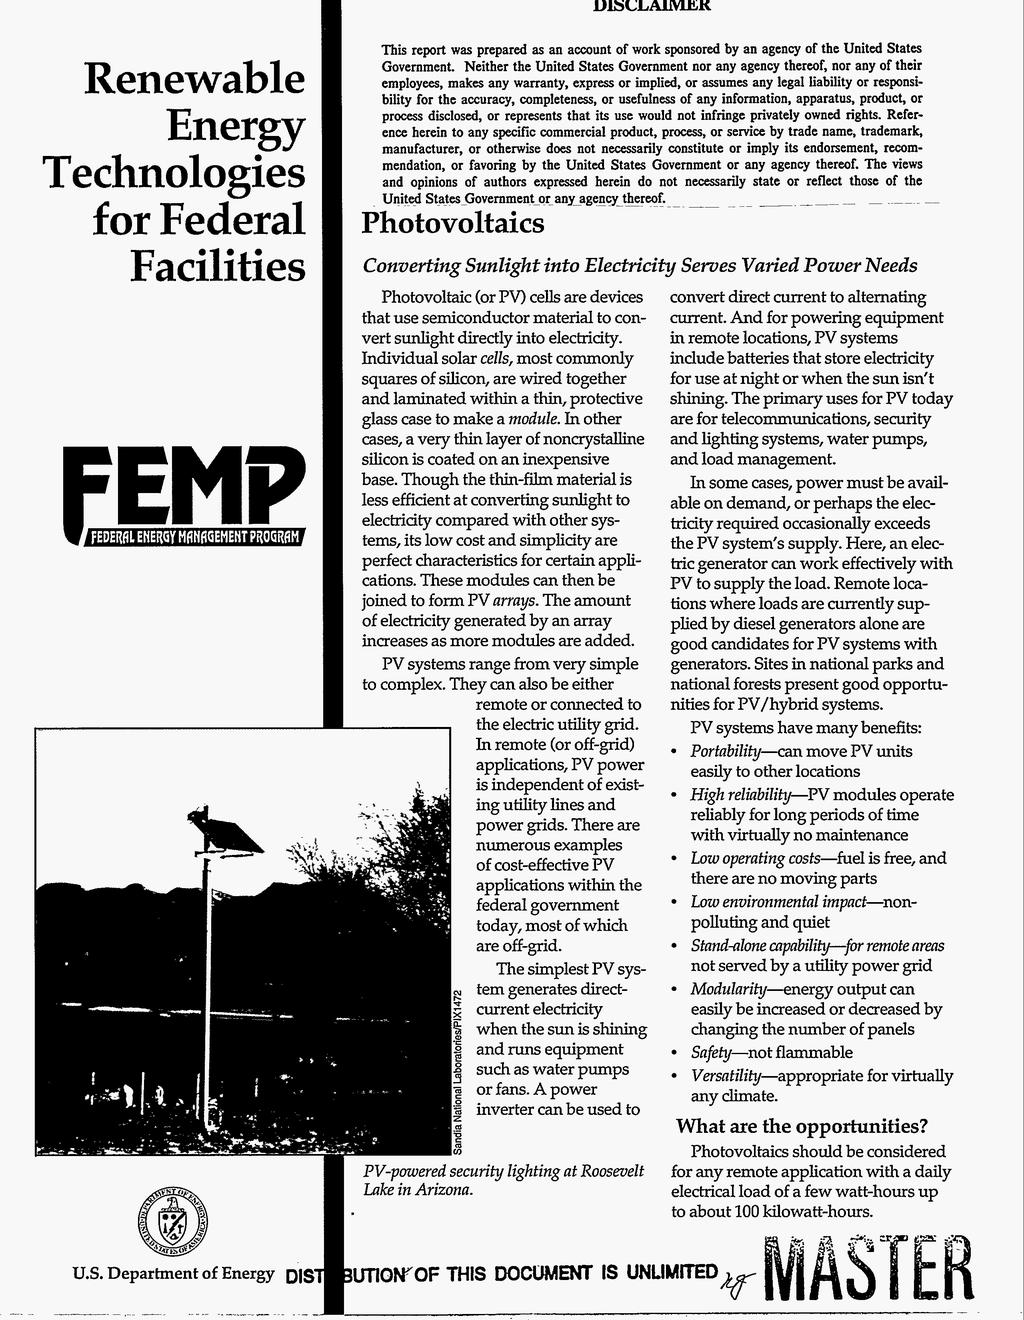 Renewable Energy Technologes for Federal Facltes Ths report was prepared as an account of work sponsored by an agency of the Unted States Government.